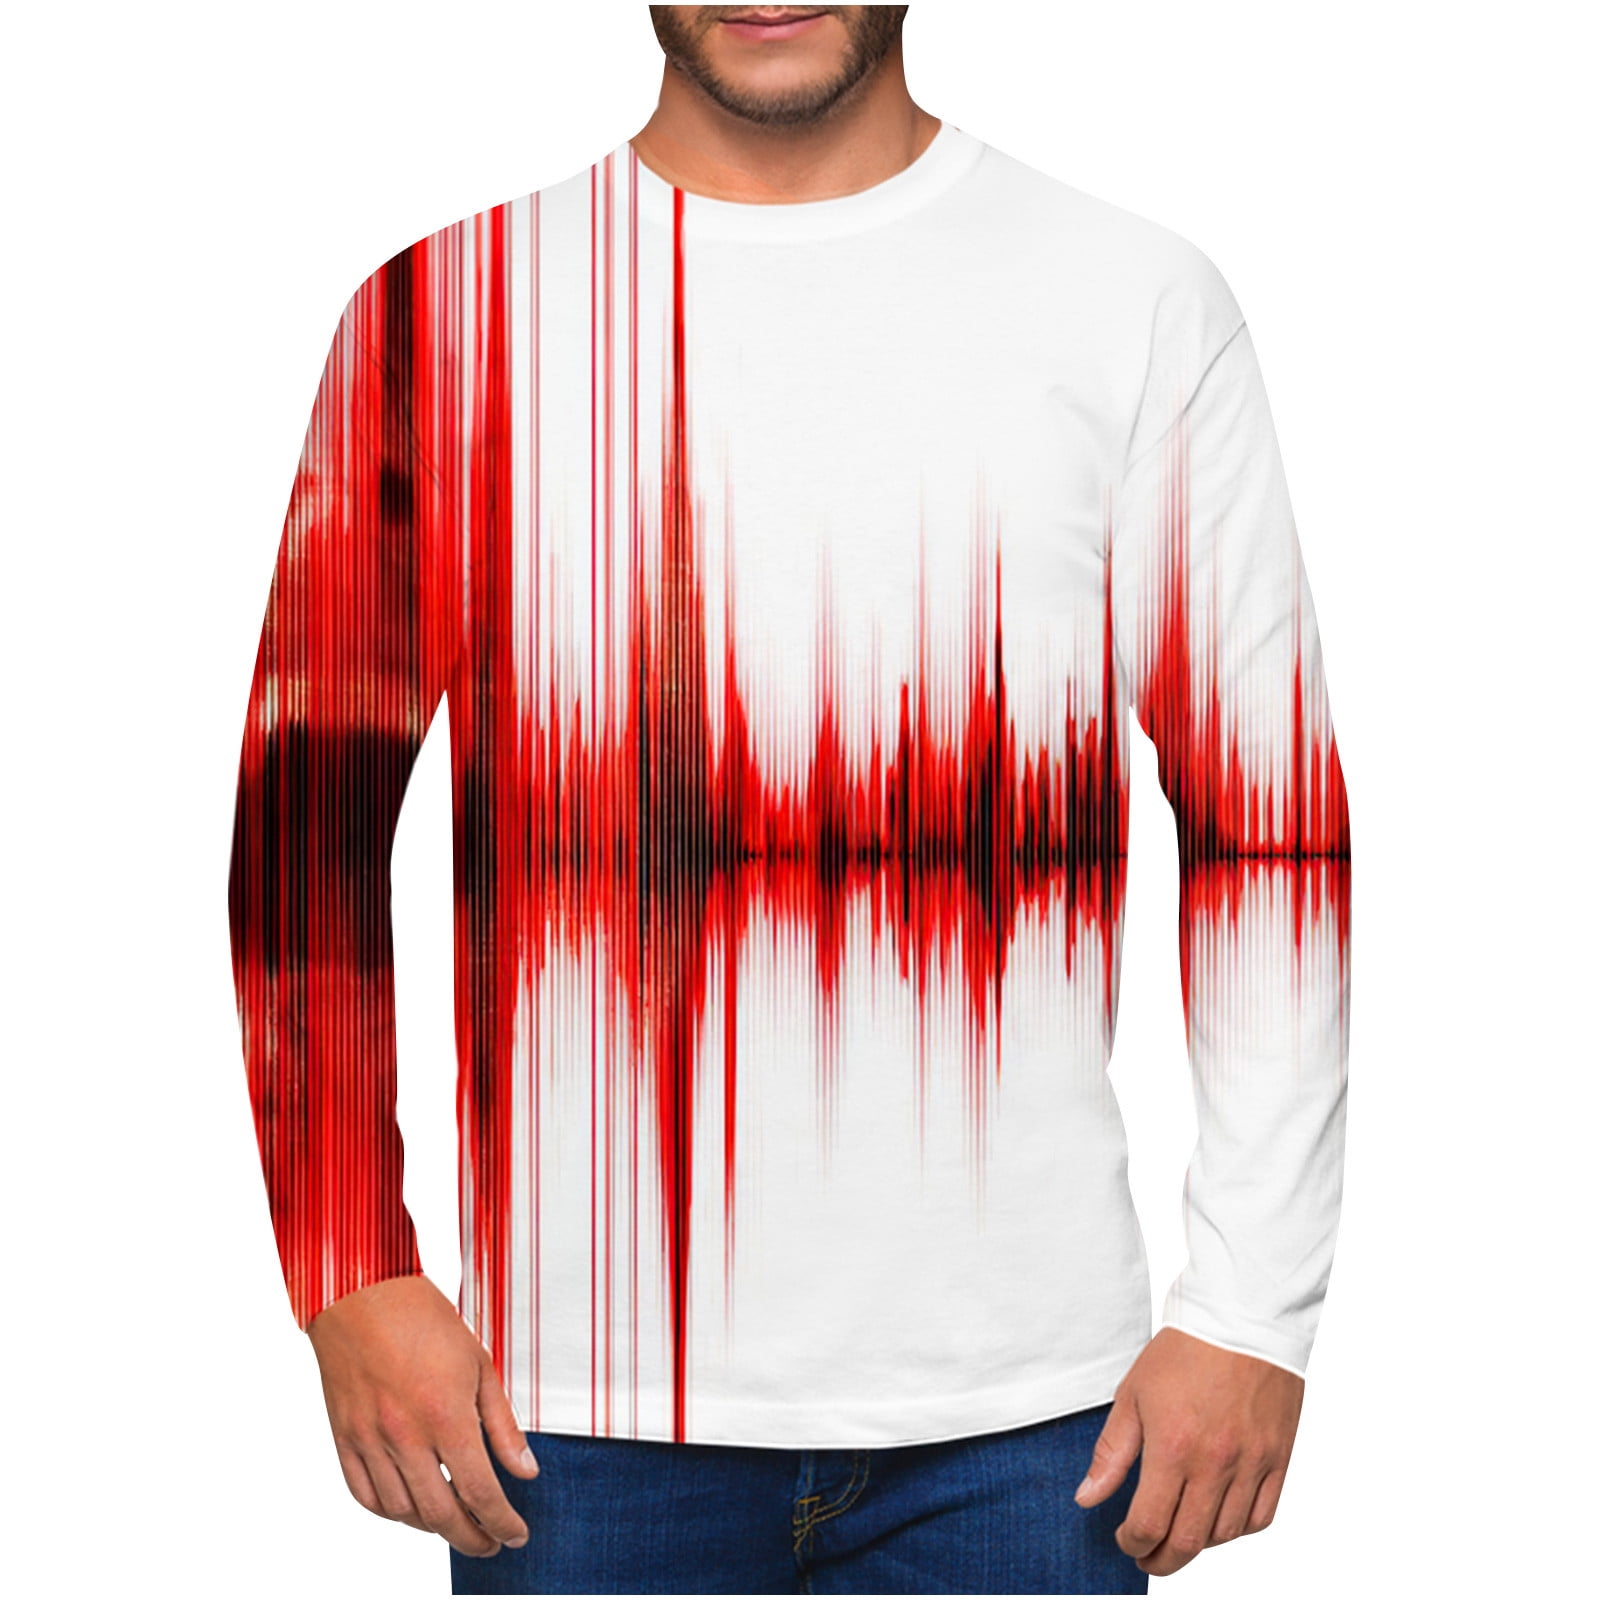 XFLWAM Long Sleeve Tee Shirts for Mens Boys Fashion 3D Abstract Graphic Shirt Print Round Neck Daily Tops Streetwear Red L - Walmart.com